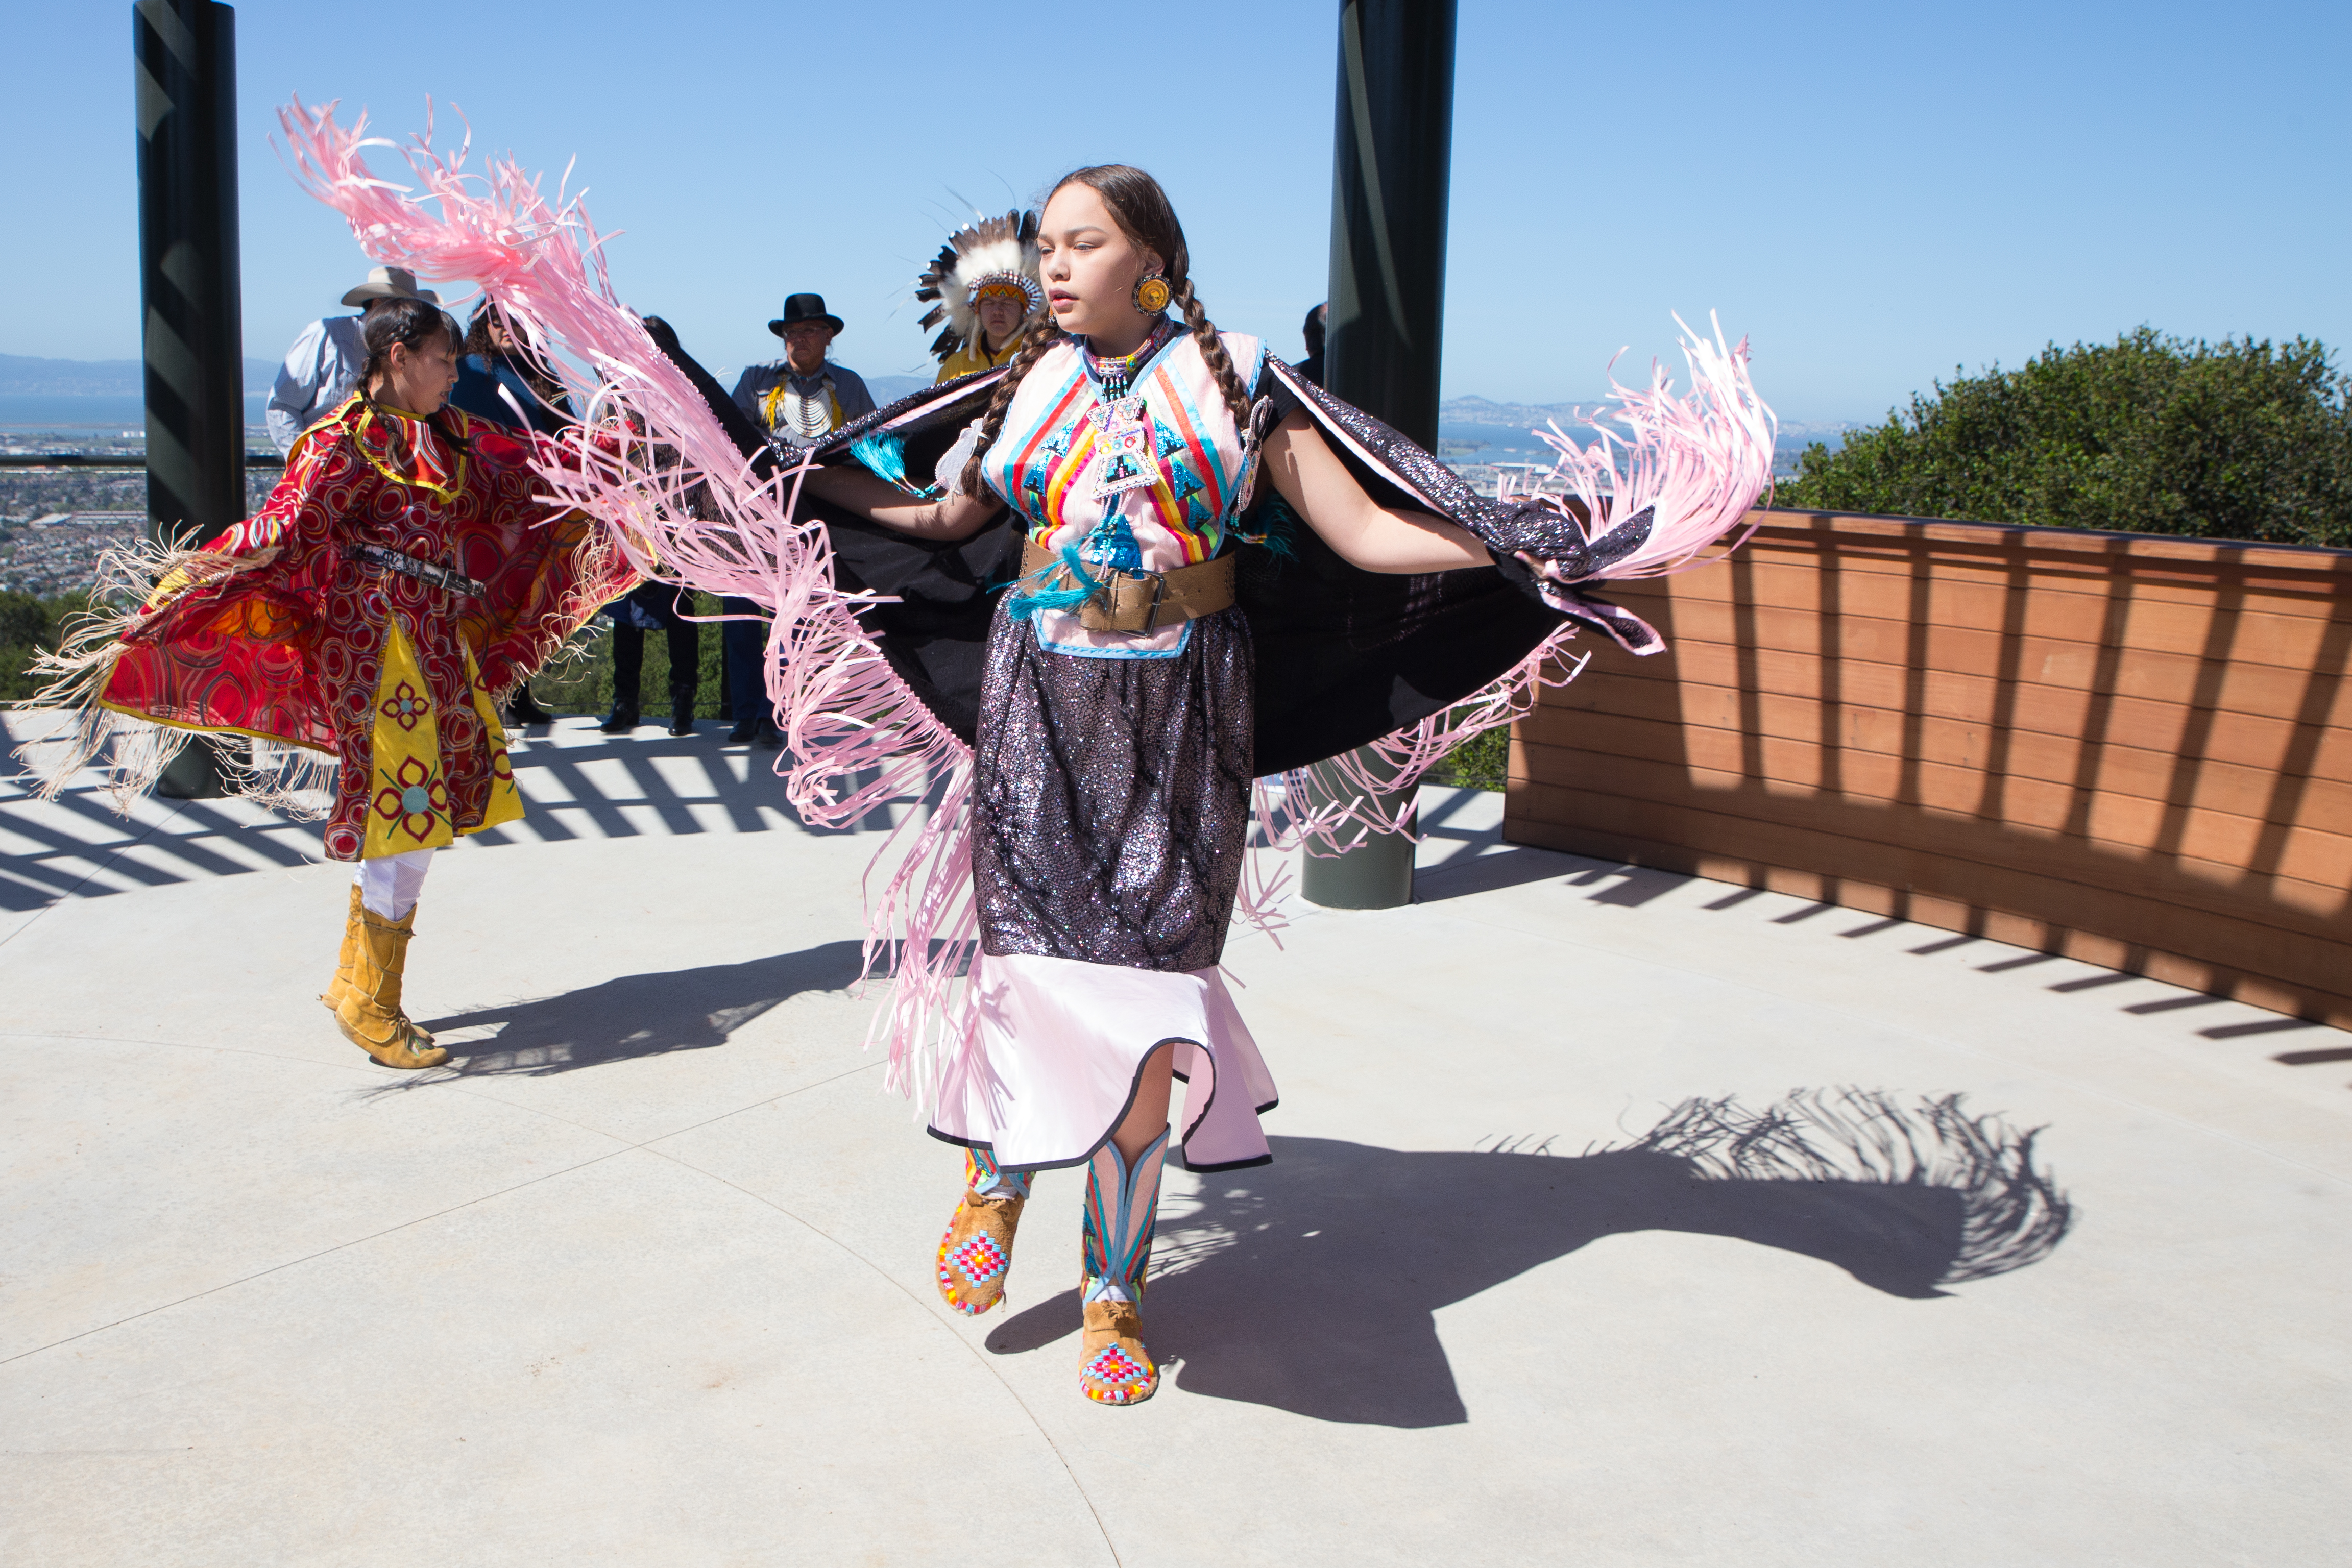 Jaklyn Mistaken Chief, 12, and Dallis Mistaken Chief, 9, from the Blood Tribe, dance the "Fancy Shawl" dance during a ceremony to welcome fourteen bison brought from the Blackfeet Nation in Montana.